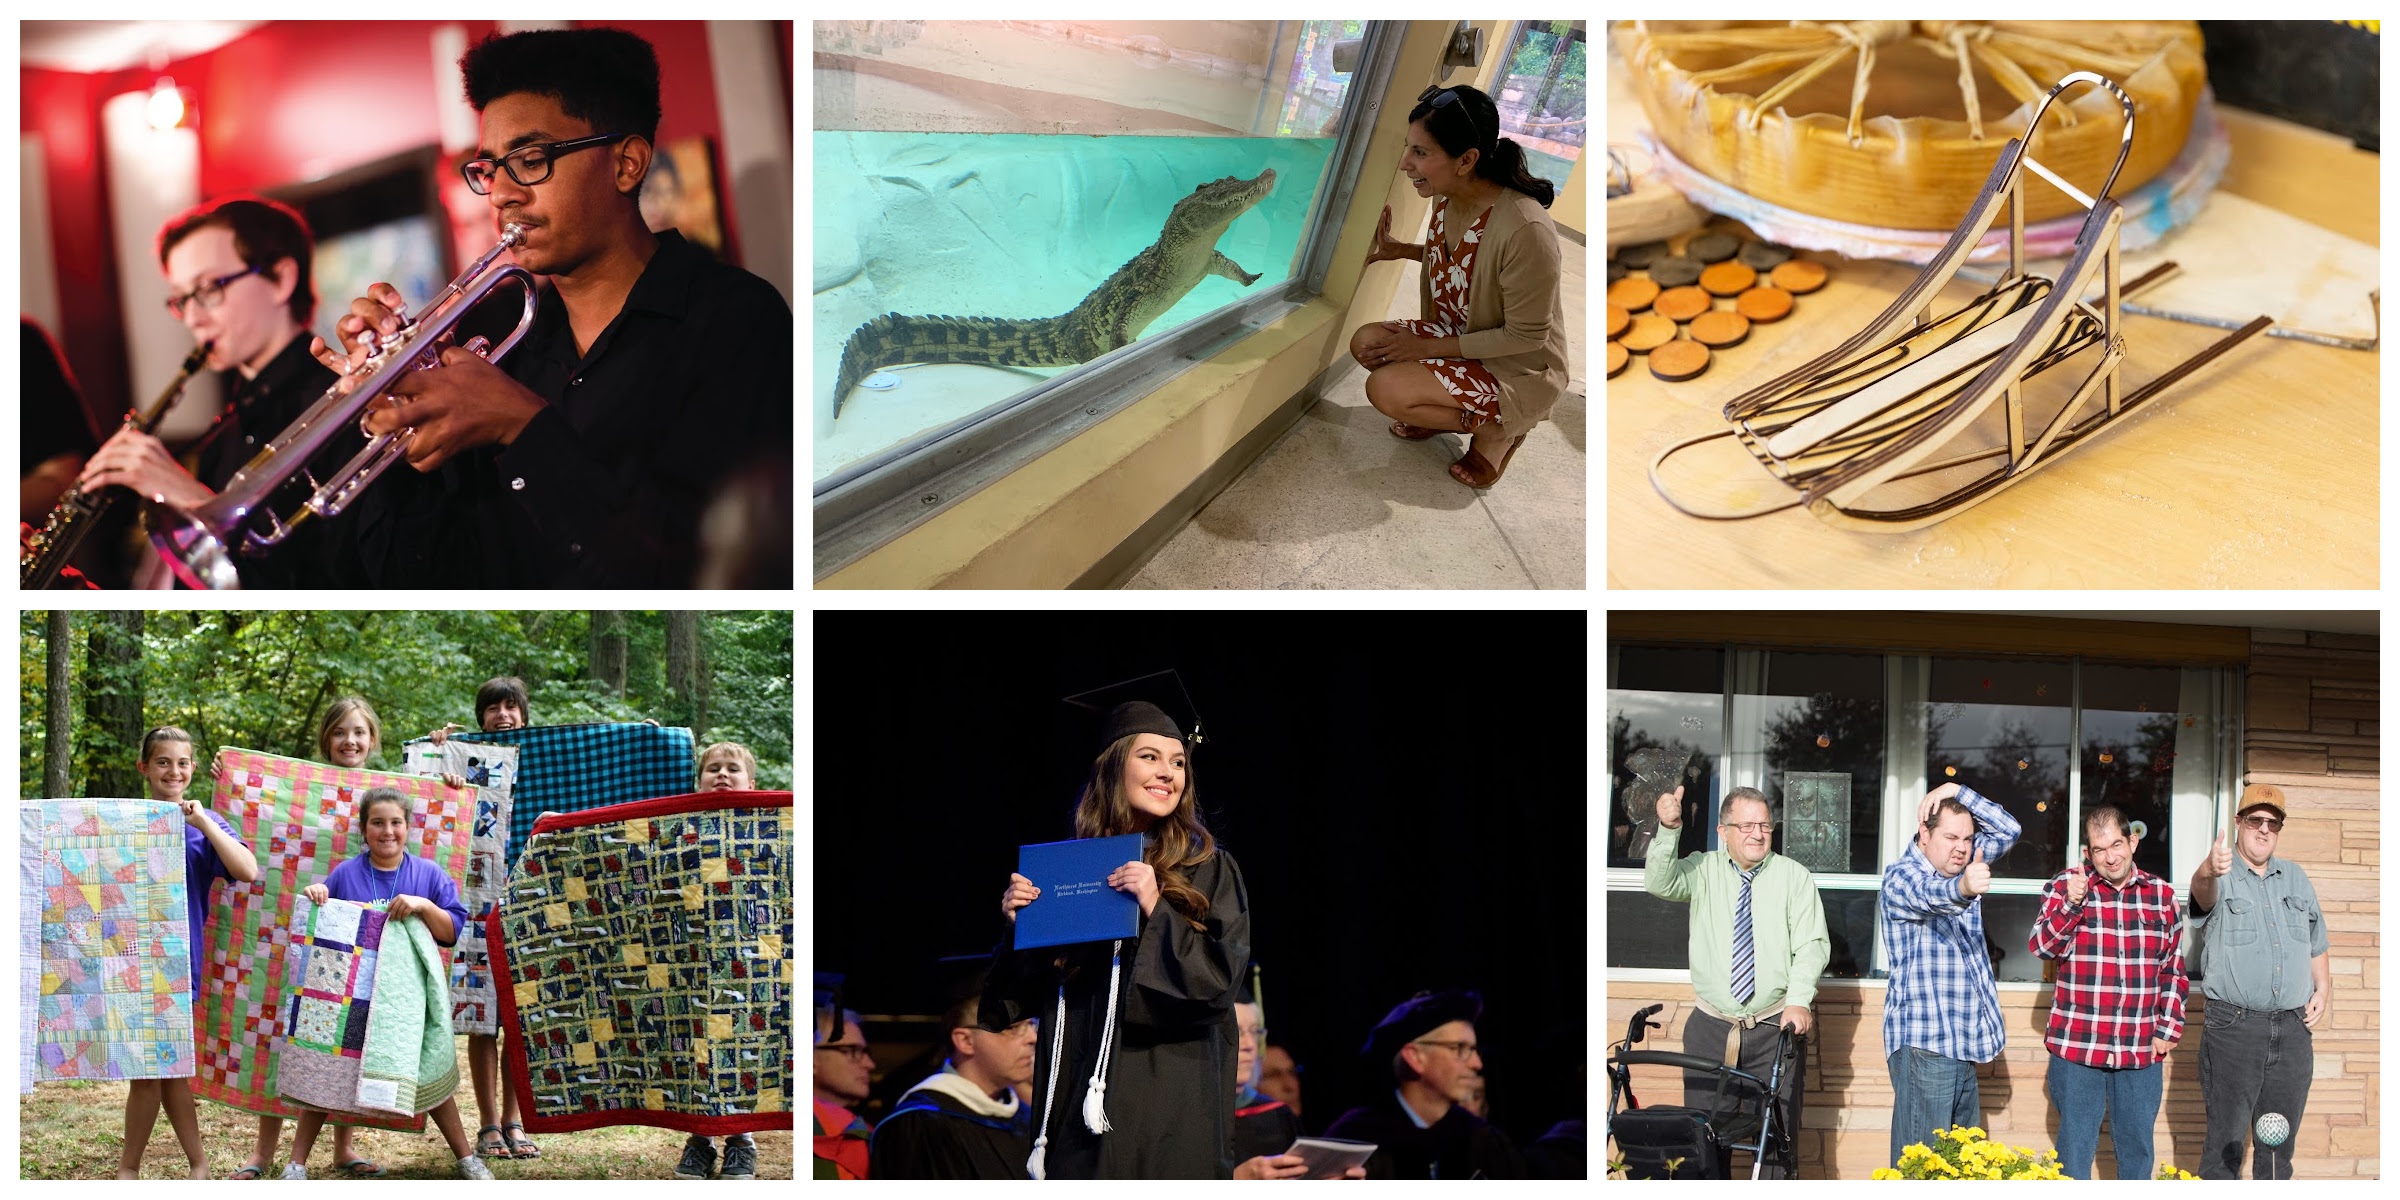 A collage of Fall 2022 Murdock Trust grantees; photos include two individuals playing trumpet, a woman looking at an alligator through a tank, a small machine, a group of students holding quilts, a woman wearing cap and gown receiving her degree, and a group of men outside posing for the camera.